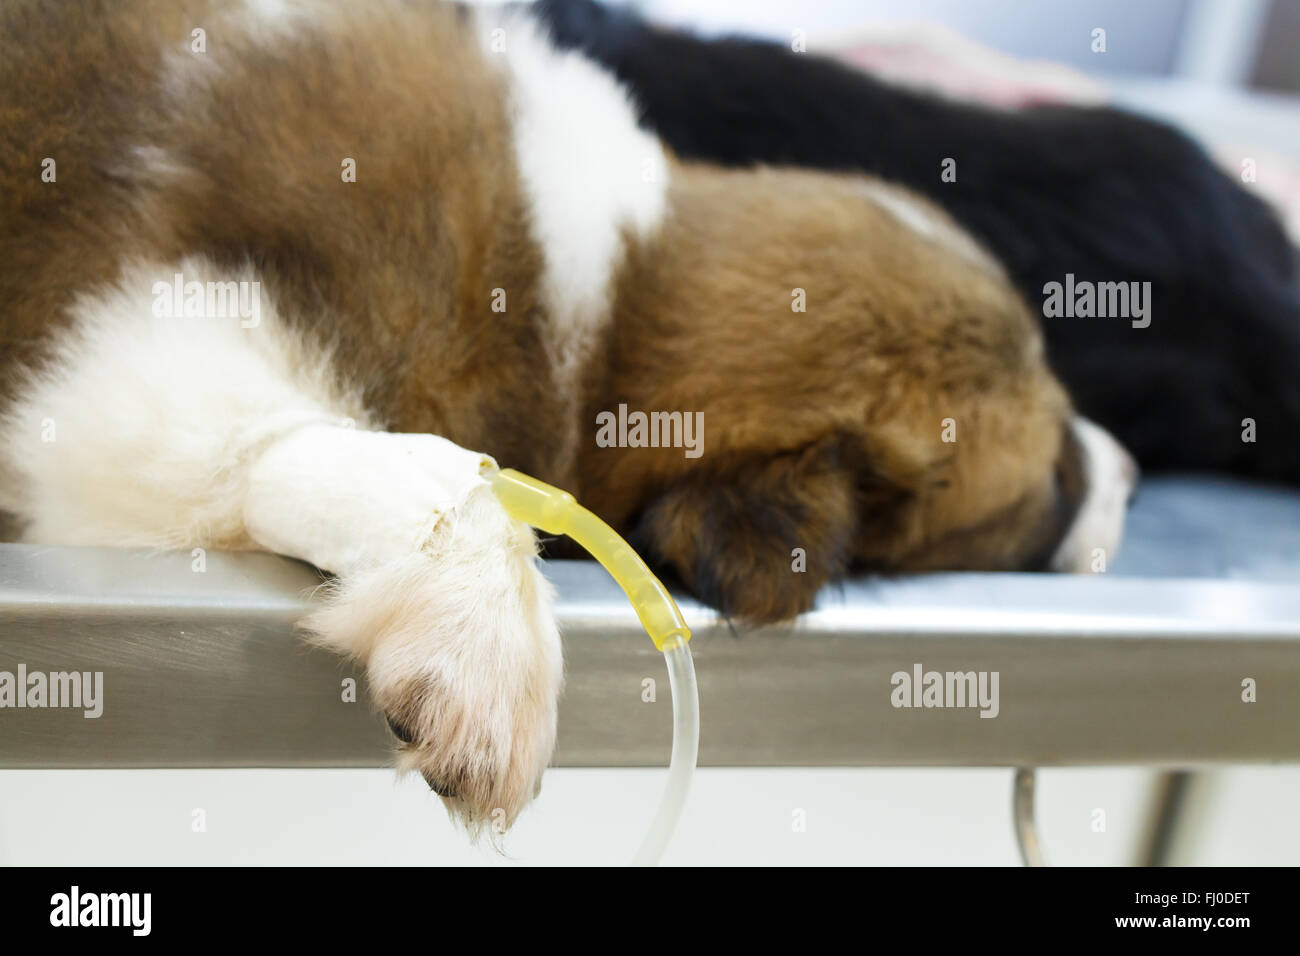 illness puppy ( Thai bangkaew dog ) with intravenous drip on operating table in veterinarian's clinic Stock Photo